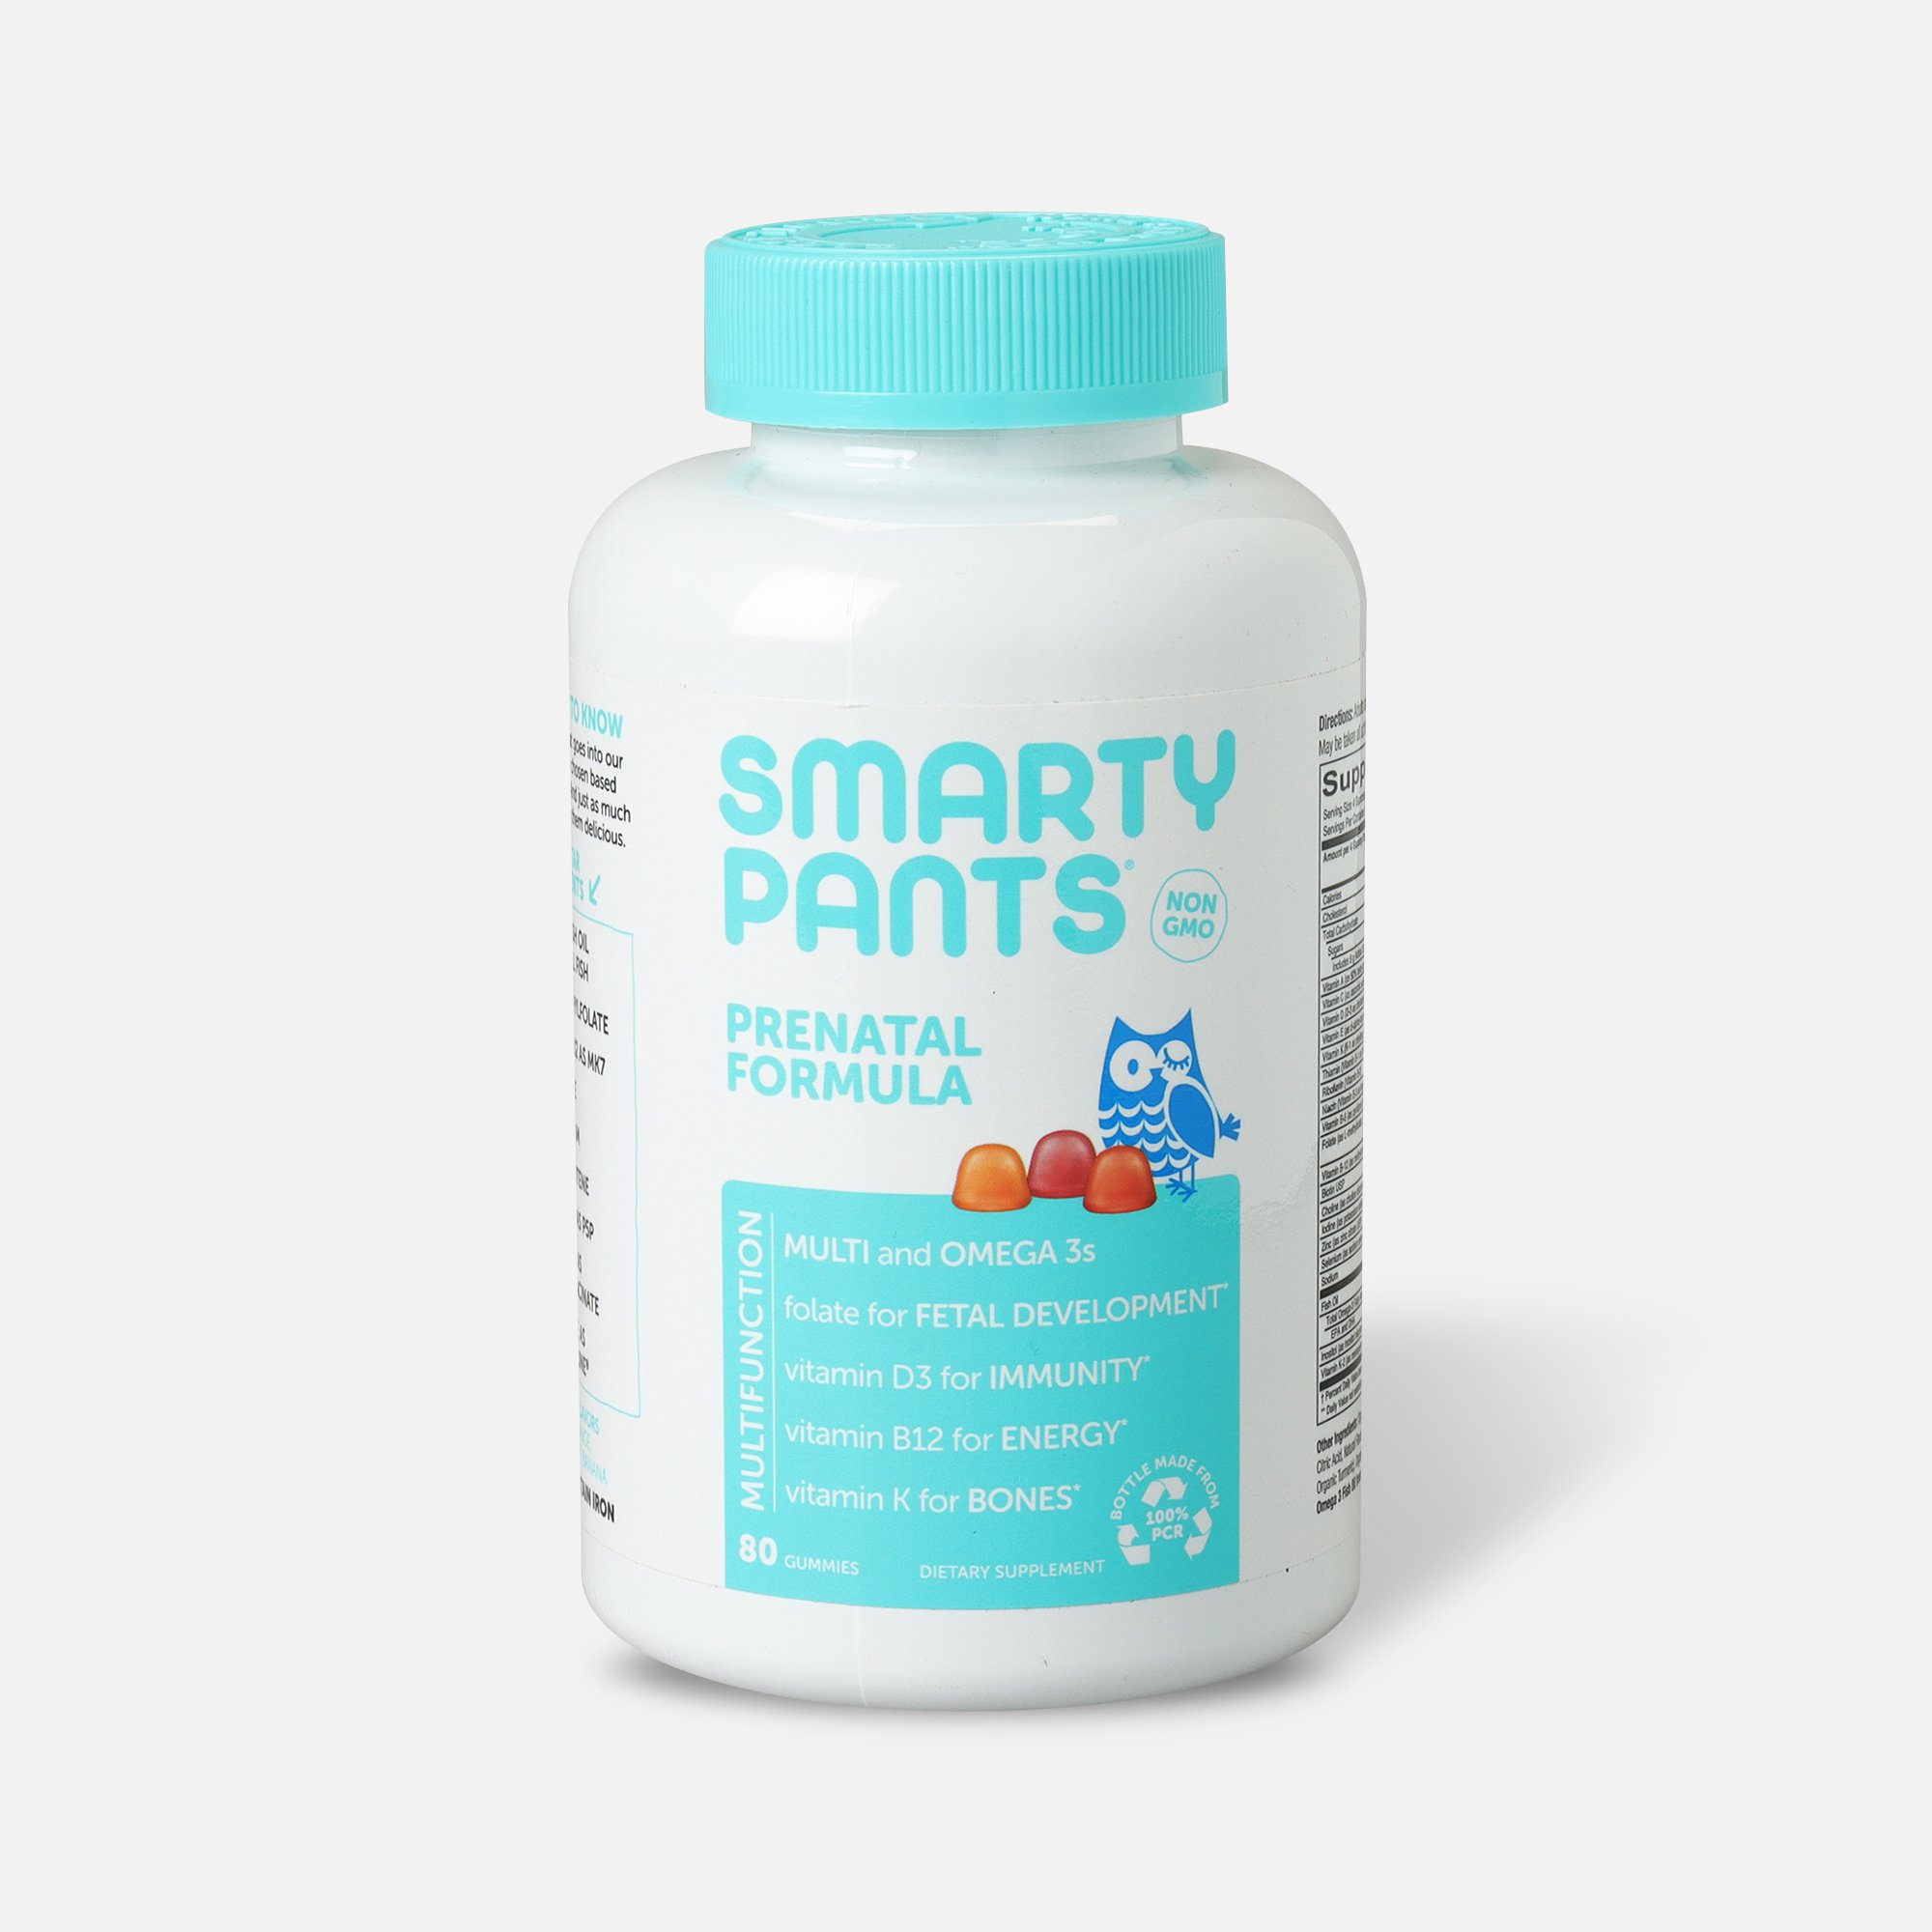 Well Done Smarty Pants! Chocolate Gift – Quirky Chocolate